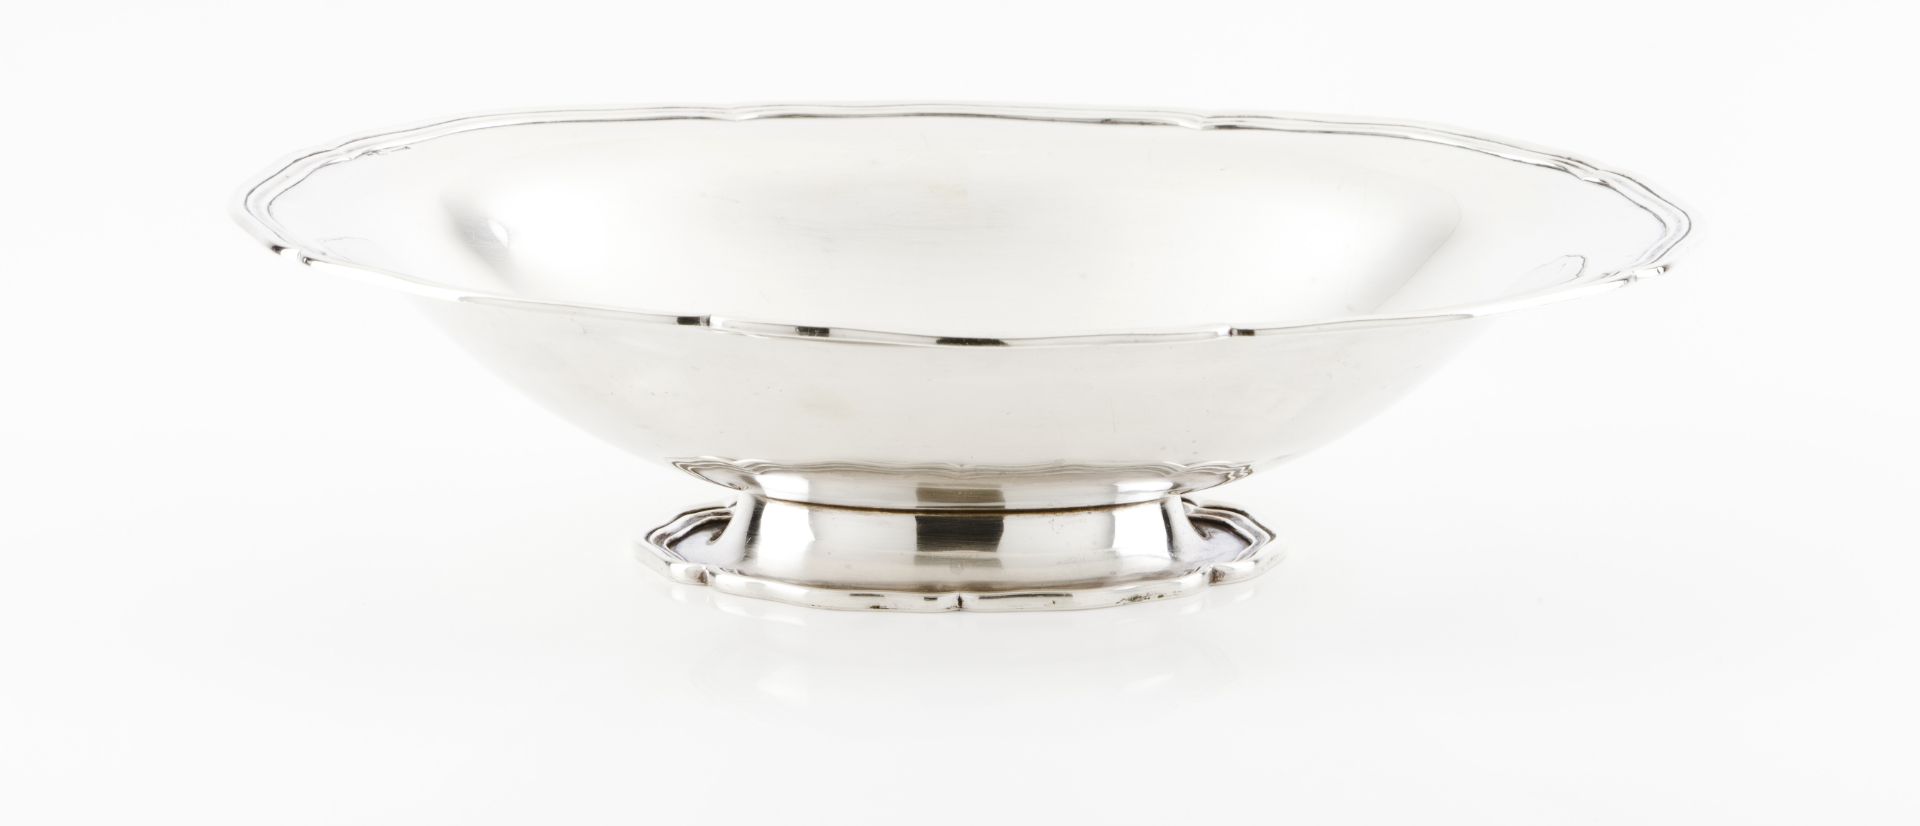 A fruit bowlPortuguese silver Oval shaped of plain body and grooved rim on an oval foot Eagle